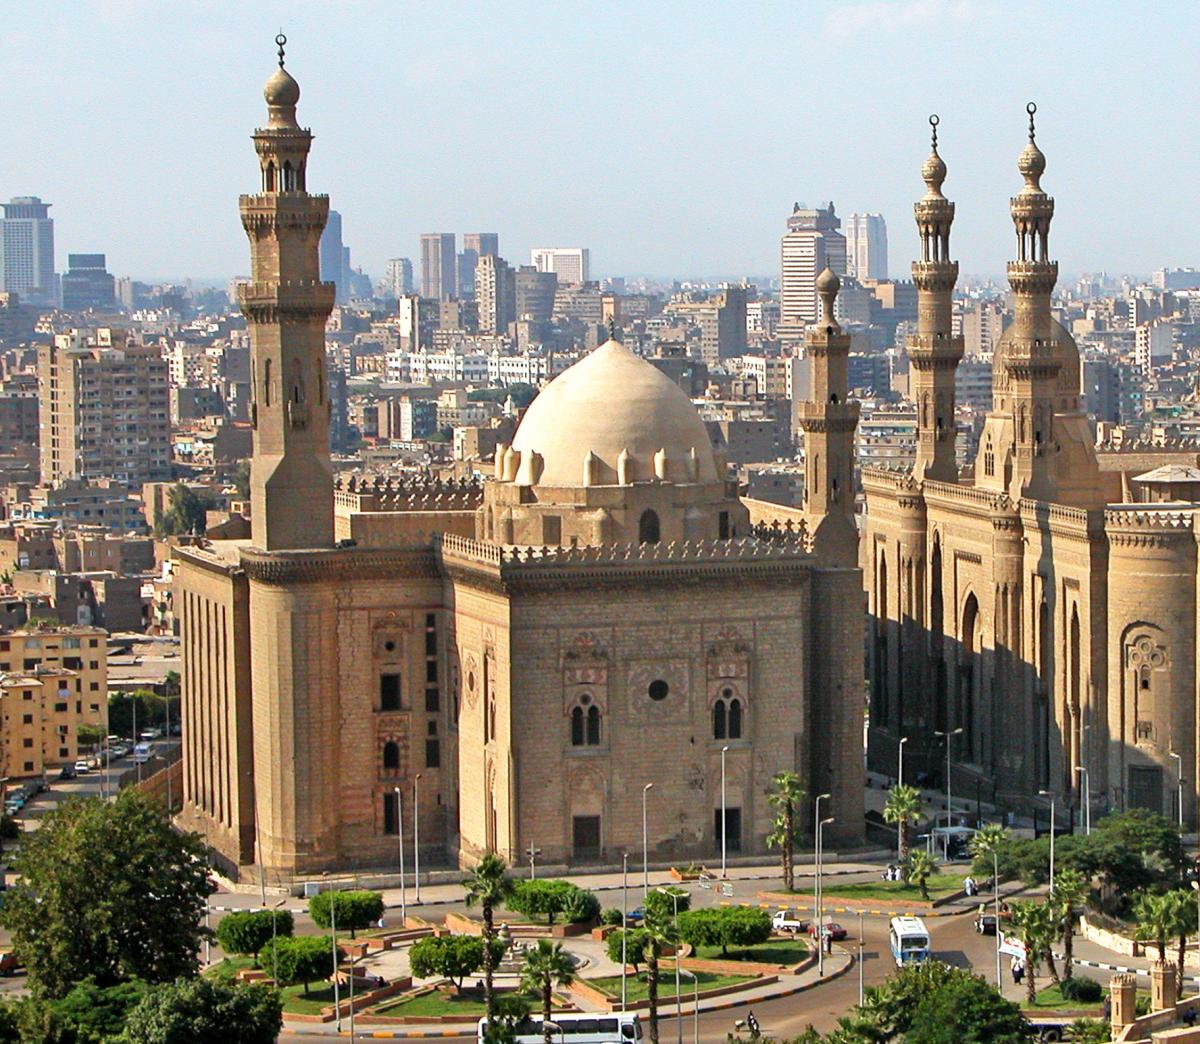 Sultan Hassan Mosque in Cairo: A Monument of Religious and Architectural Splendor